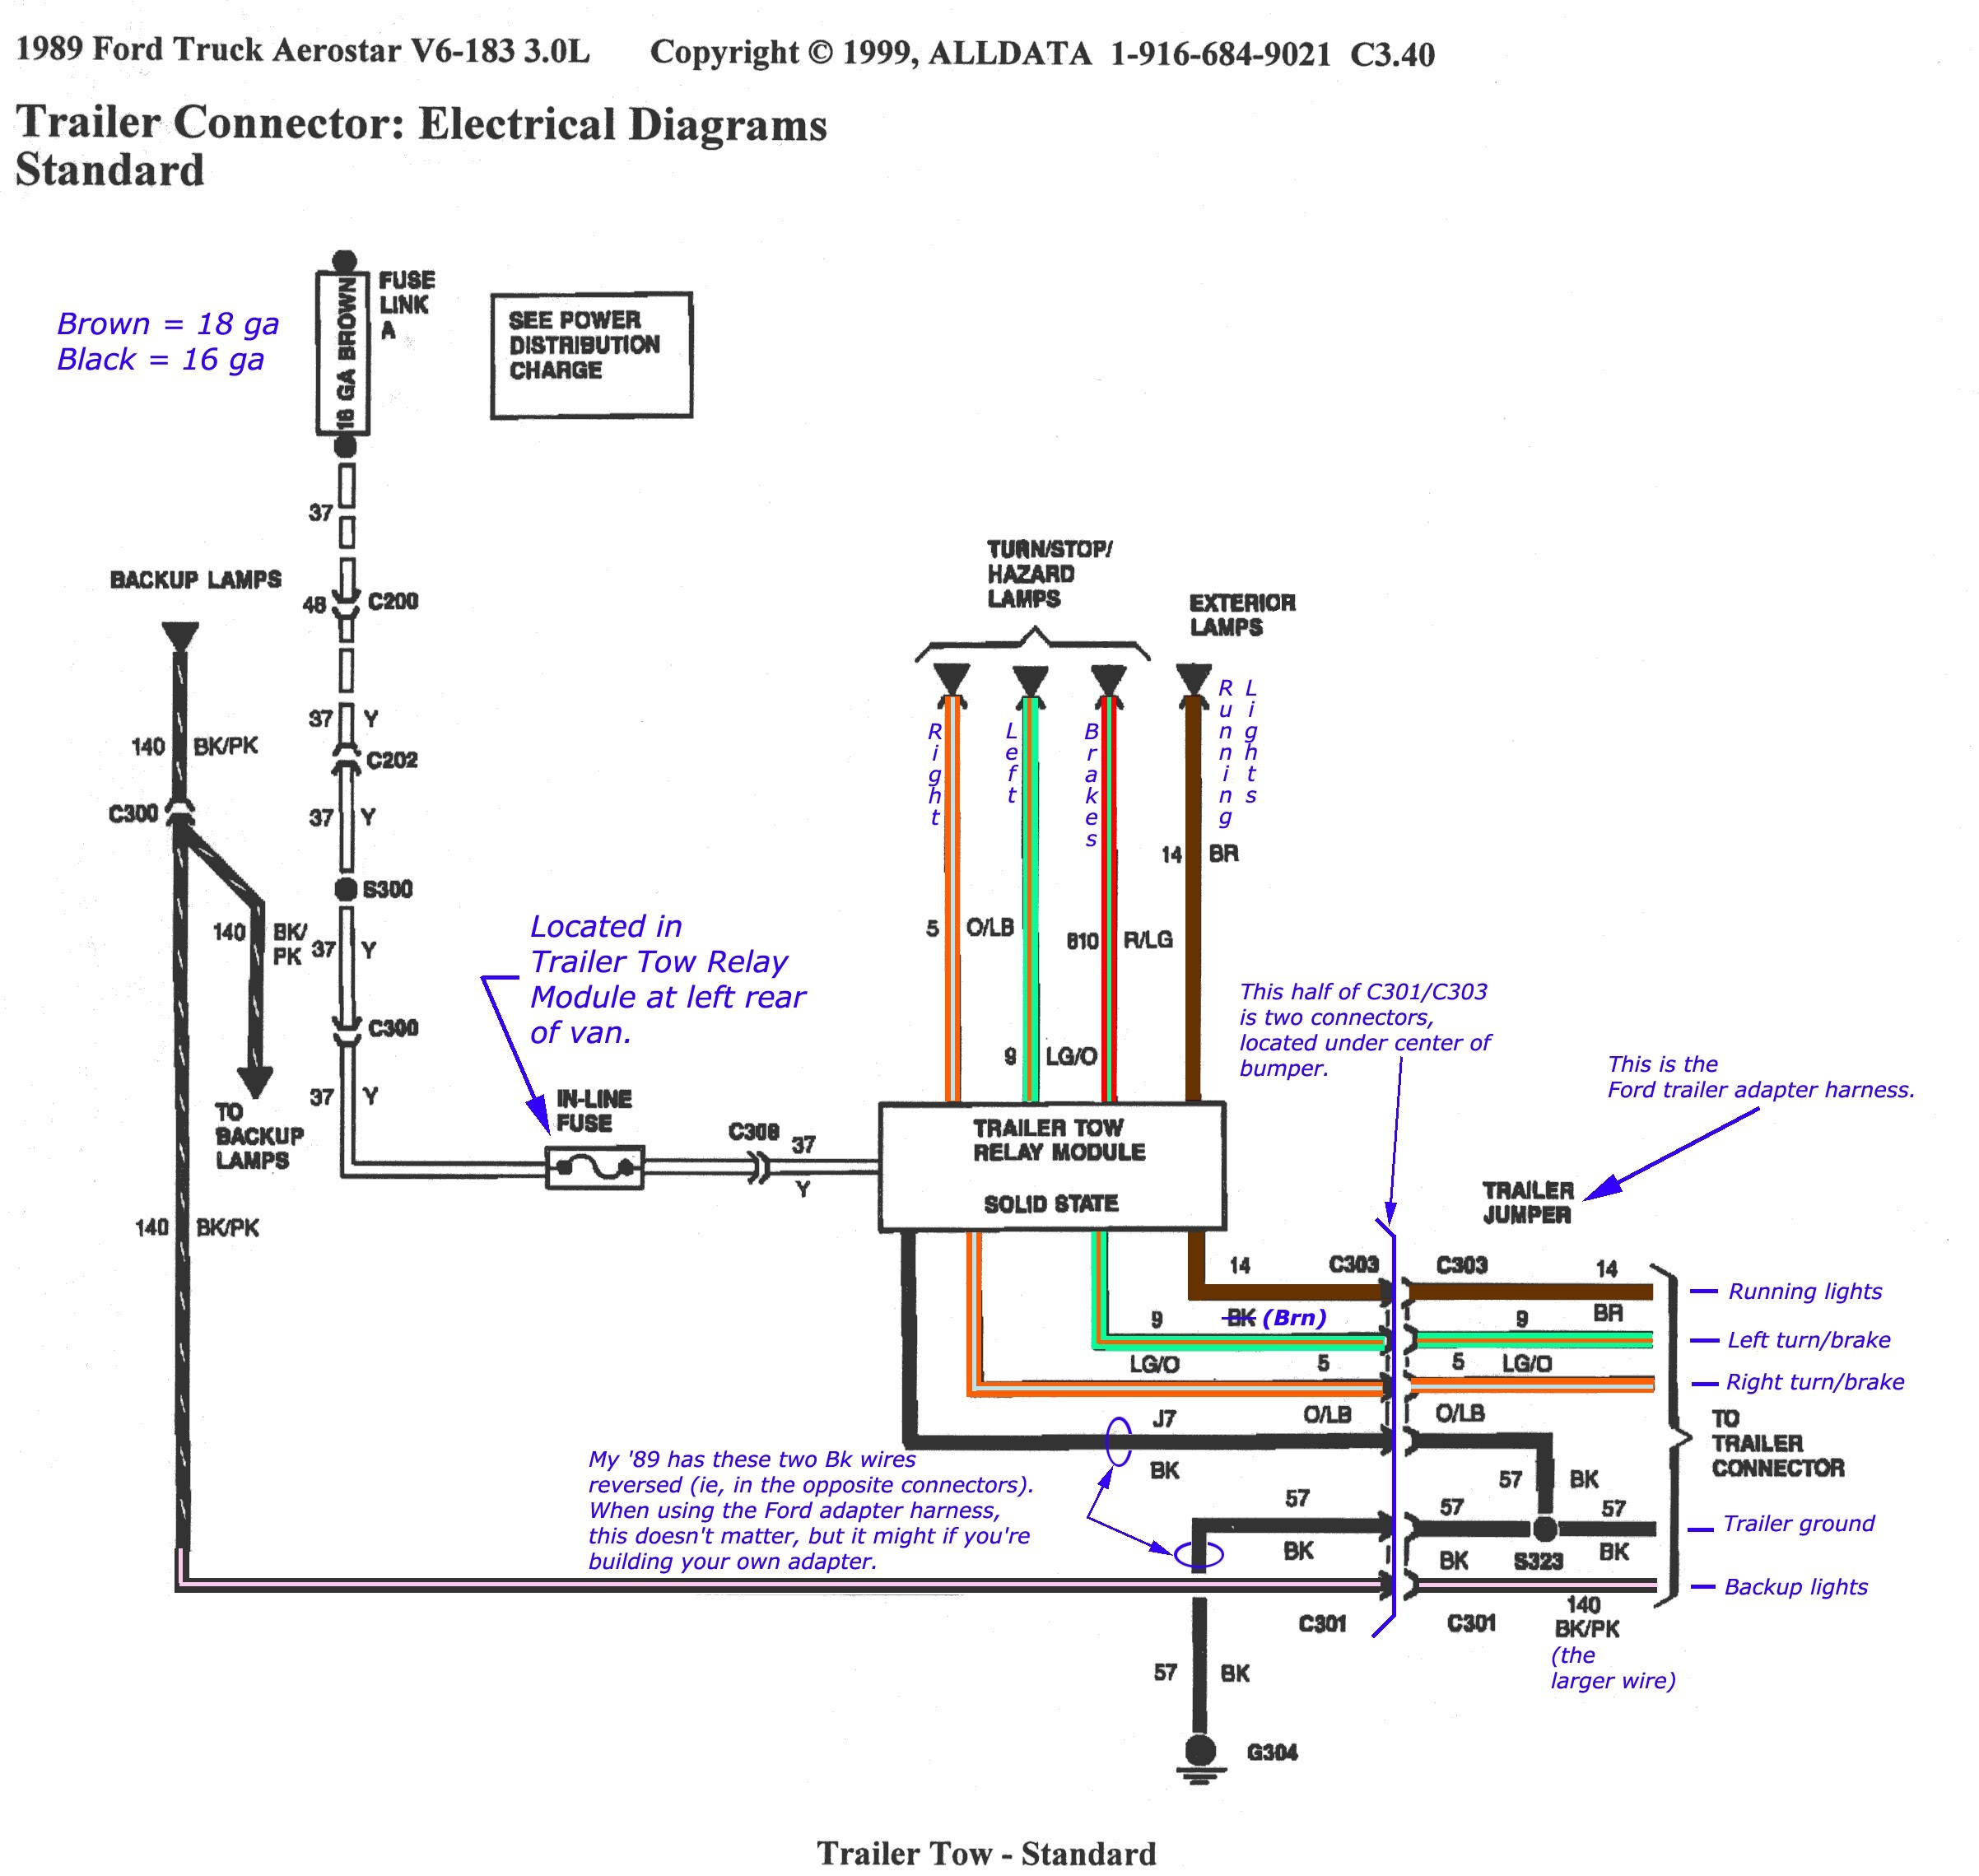 4 Wire Trailer Wiring Diagram Troubleshooting For 7 Lights The - 4 Wire Trailer Wiring Diagram Troubleshooting